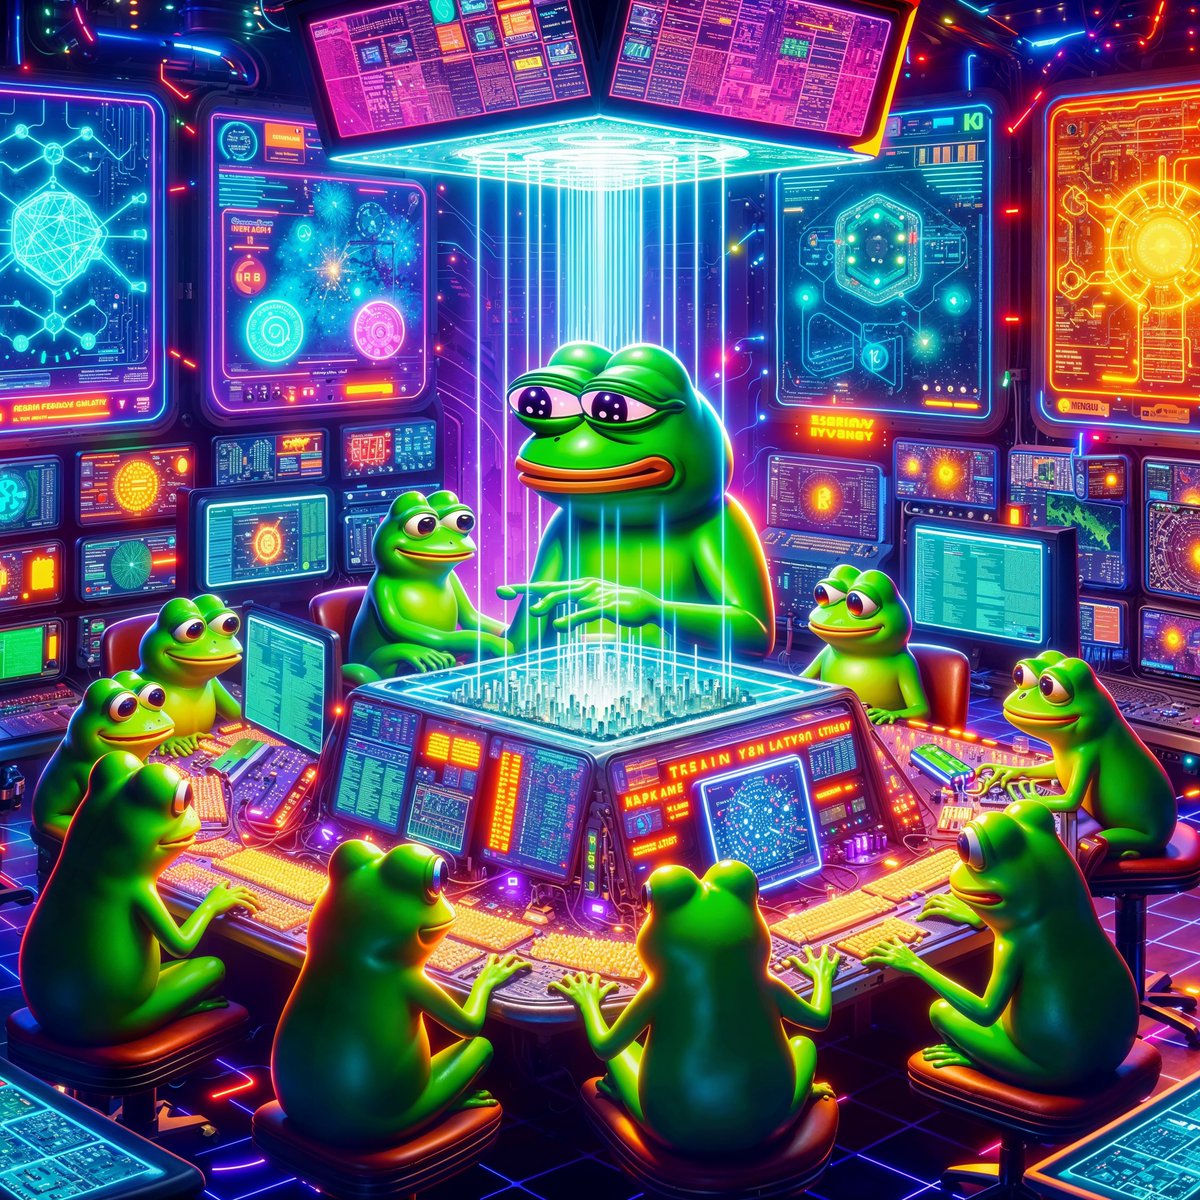 - Kek.bot release imminent
- @getbasedai Cyan testnet imminent
- Burn of @pepecoins for BasedAI Brains moved to after Cyan

What does this mean? We get to test Based L1 BEFORE burning for Brains.

Me? Giga-bullish.

Let's dig in with some alpha 🧵

1/